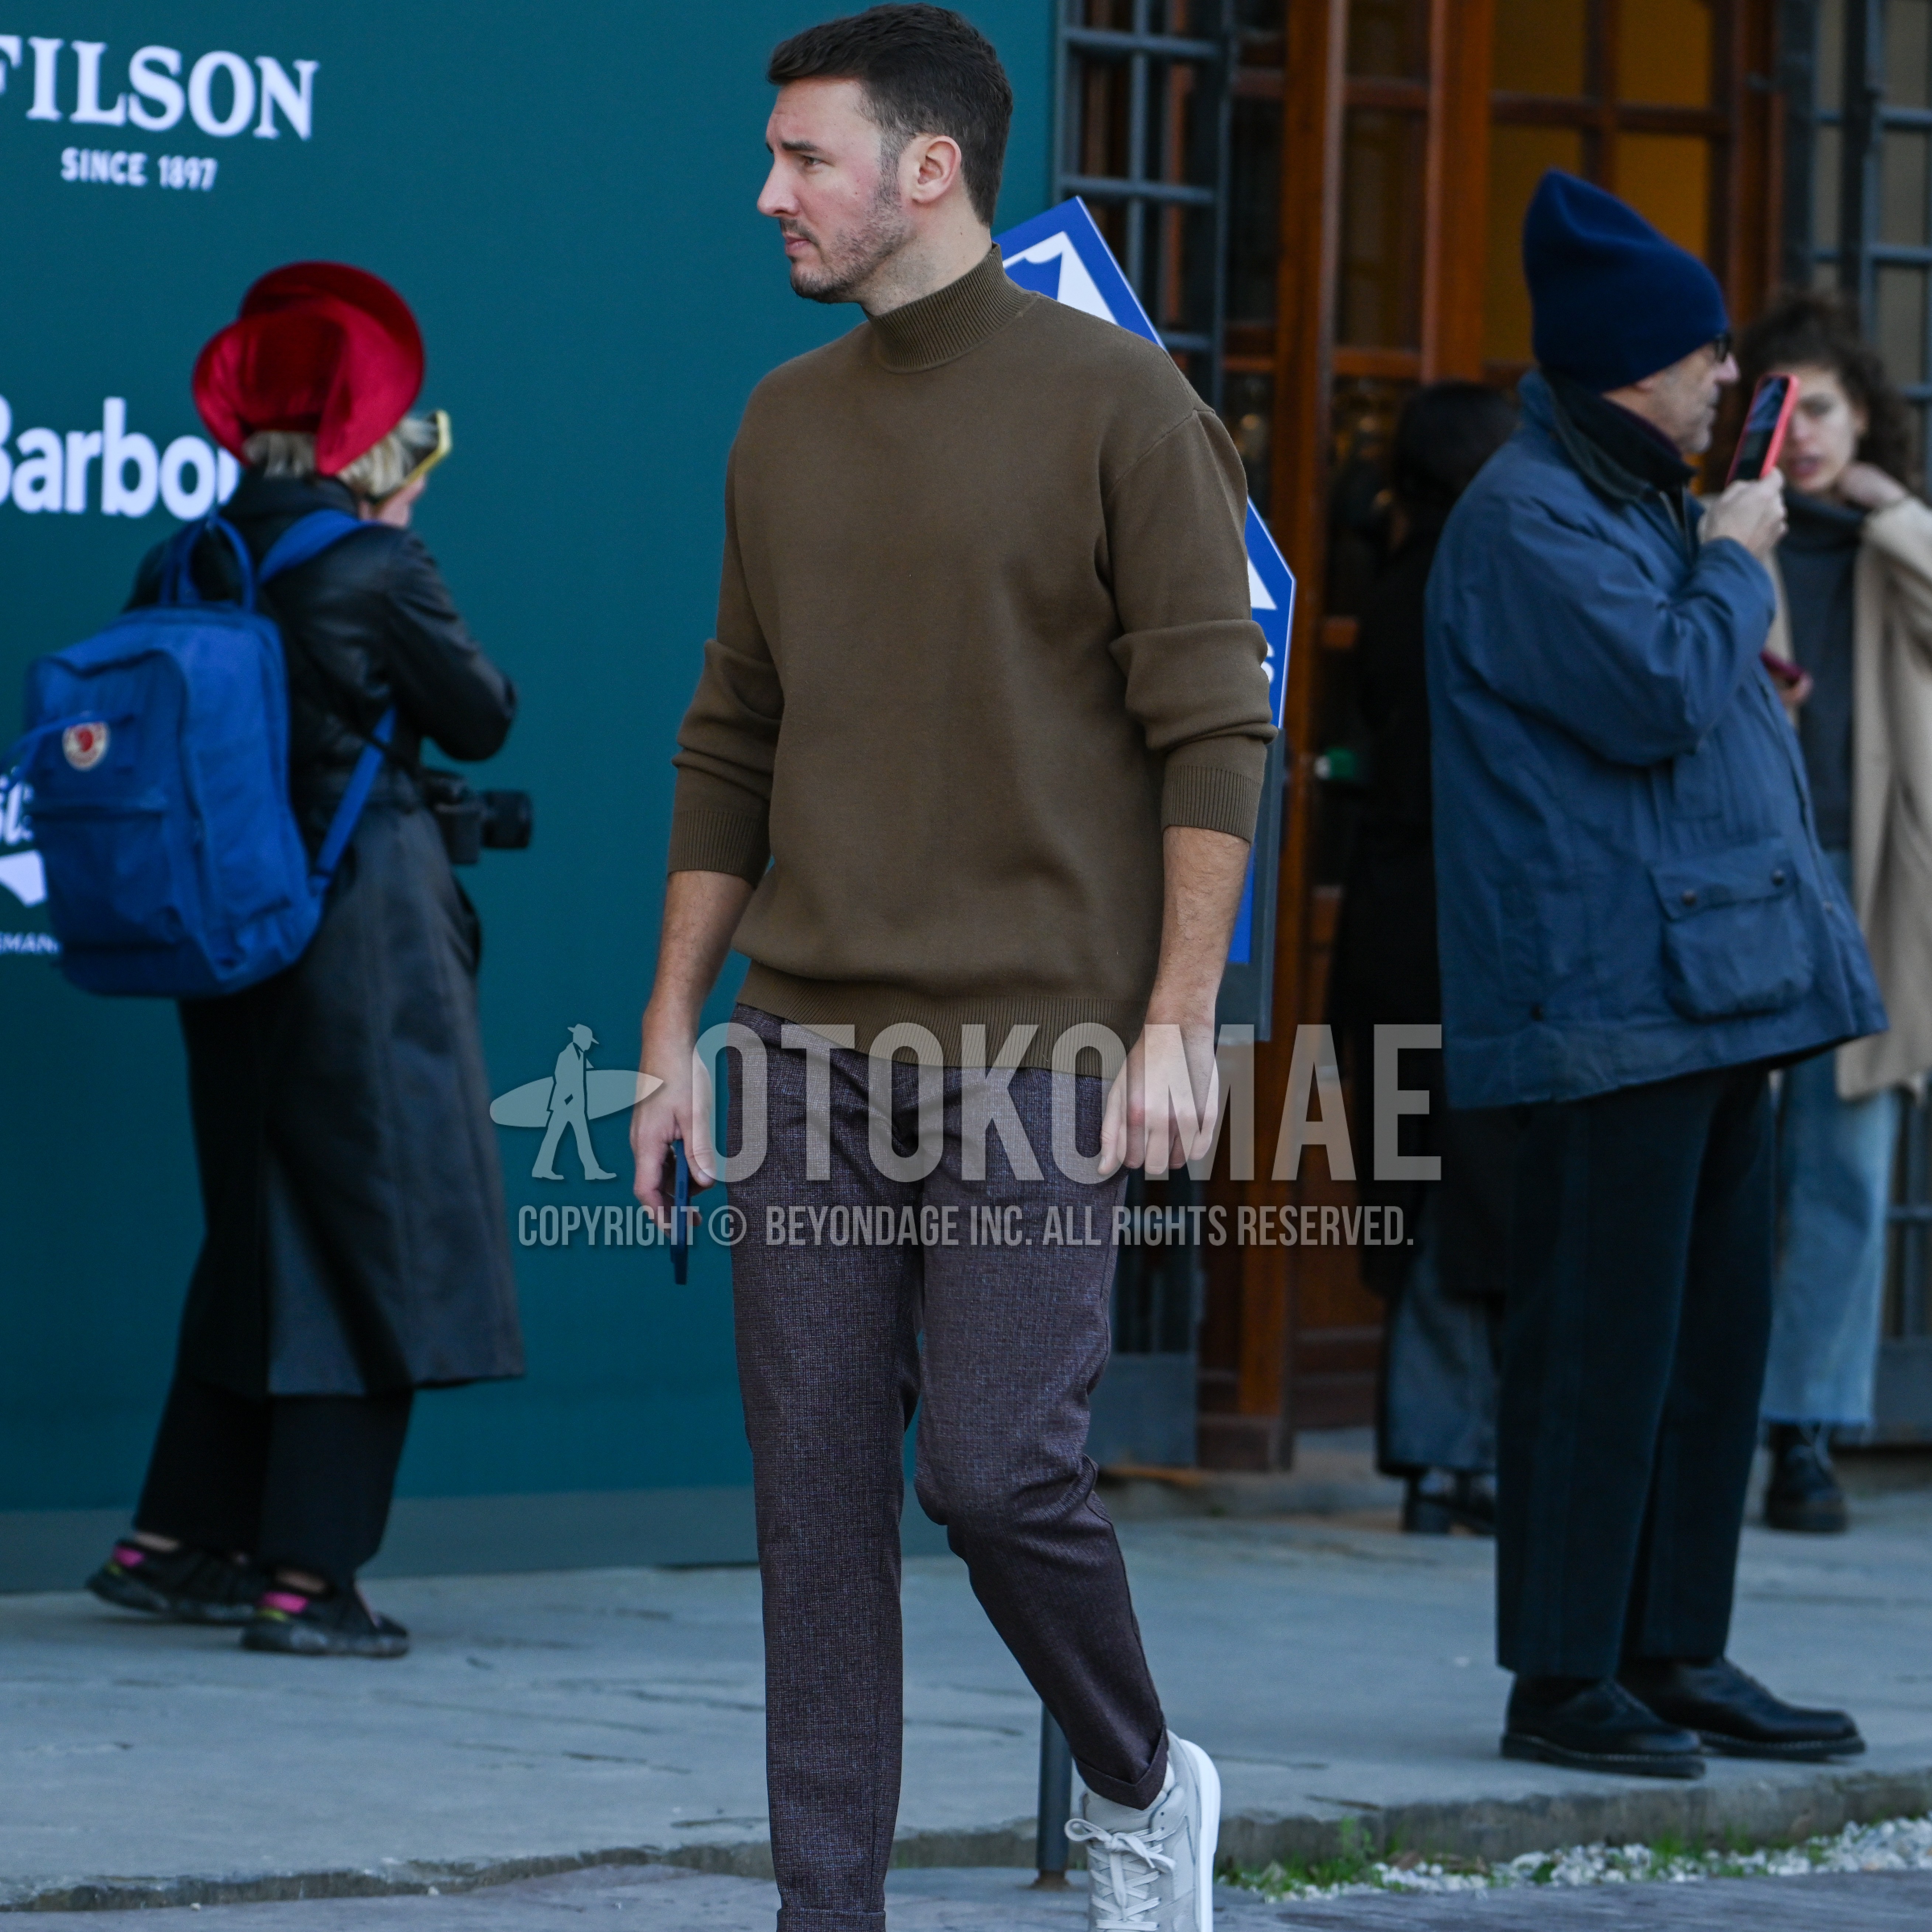 Men's autumn winter outfit with brown plain turtleneck knit, dark gray check ankle pants, gray low-cut sneakers.